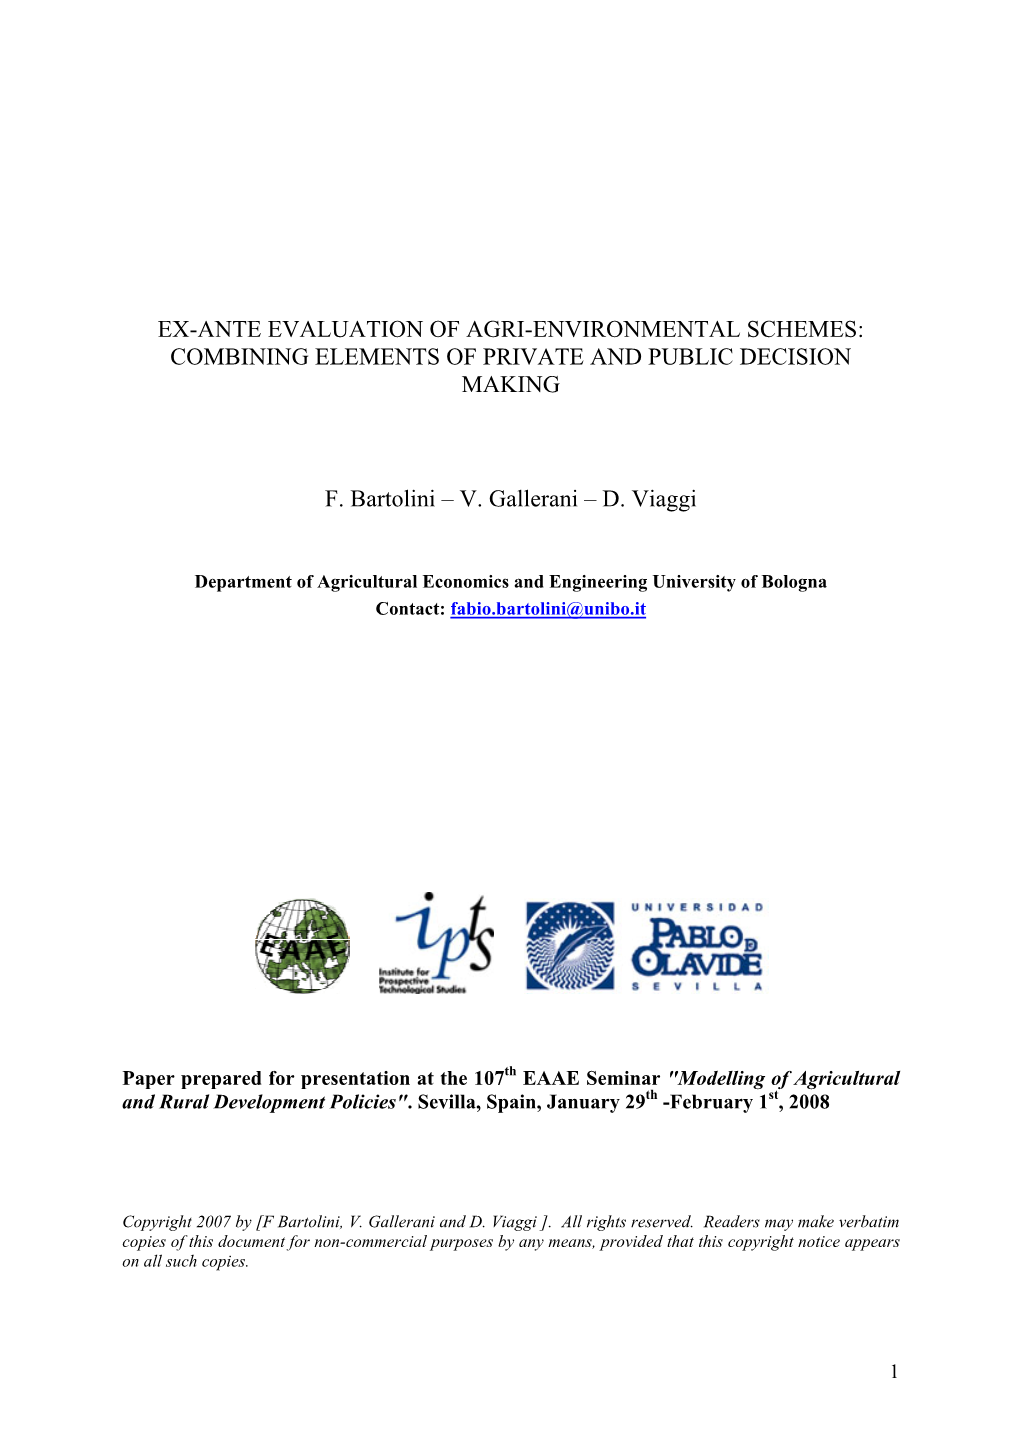 Ex-Ante Evaluation of Agri-Environmental Schemes: Combining Elements of Private and Public Decision Making